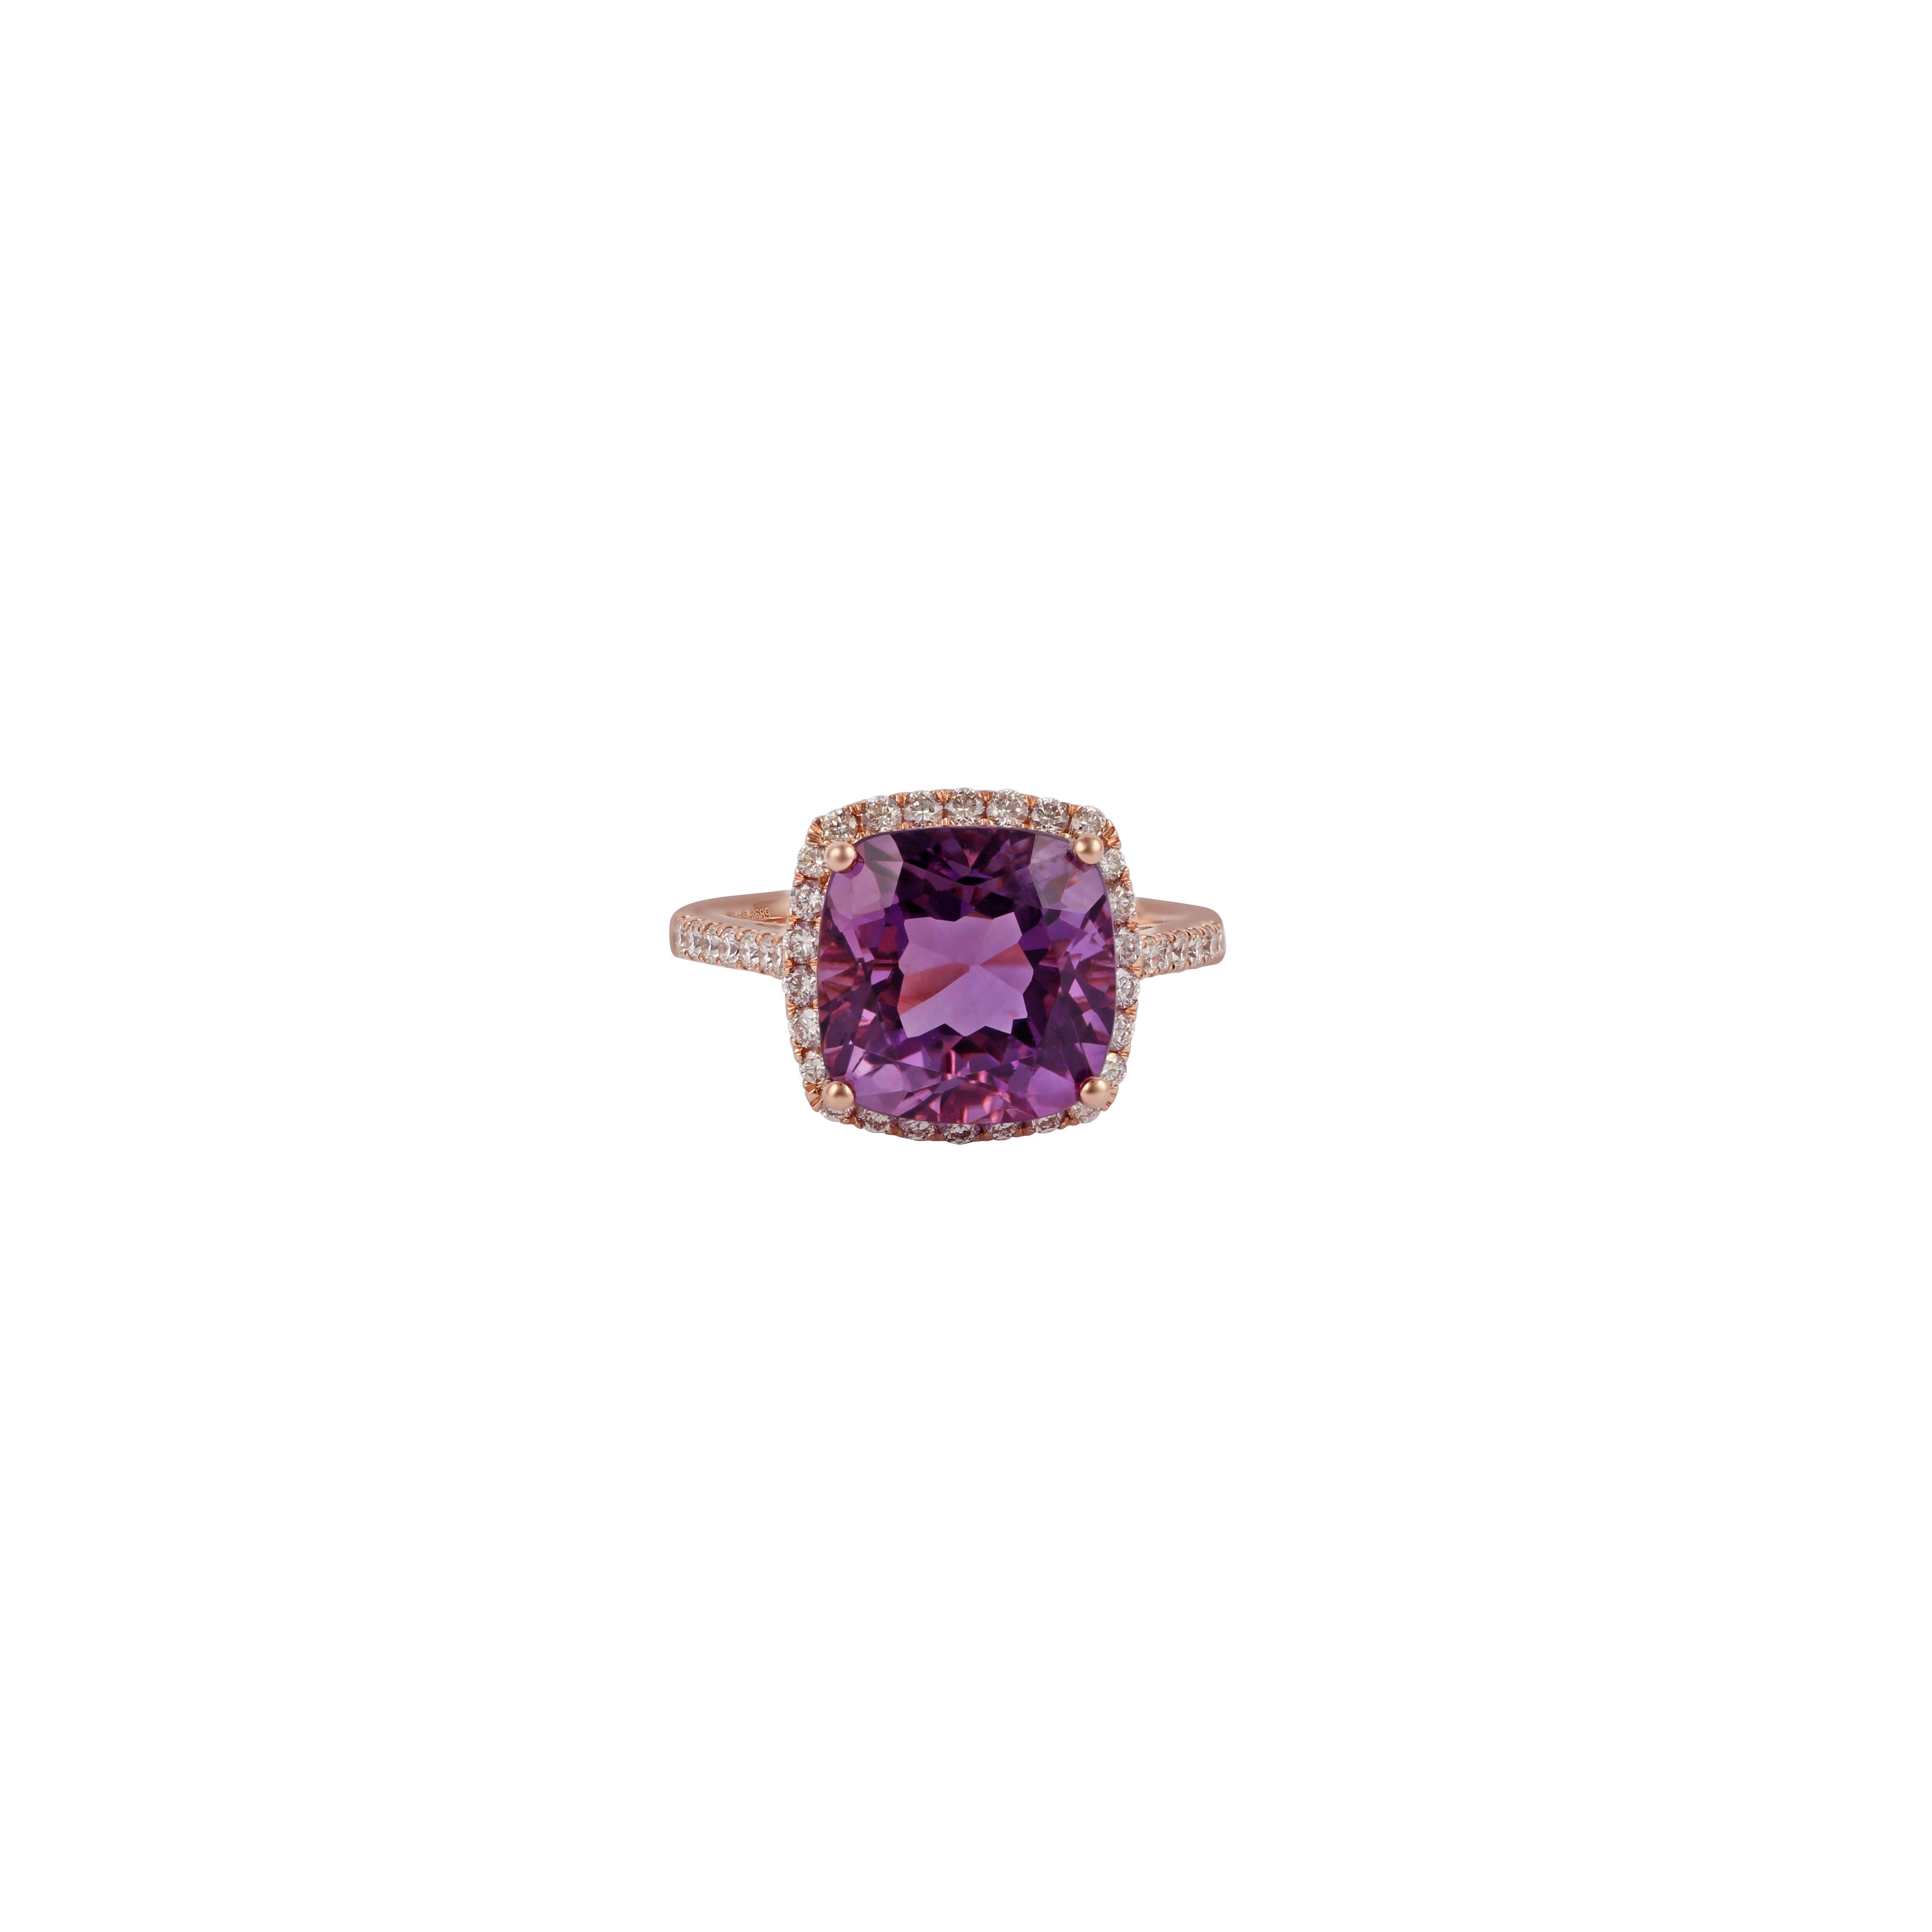 Its an elegant amethyst diamond ring studded in 18k rose gold with 1 piece cushion shaped amethyst weight 4.63 carat & 40 pieces round shaped brilliant cut diamonds weight 0.45 carat this entire ring studded in 18k rose gold weight 3.38 grams, ring